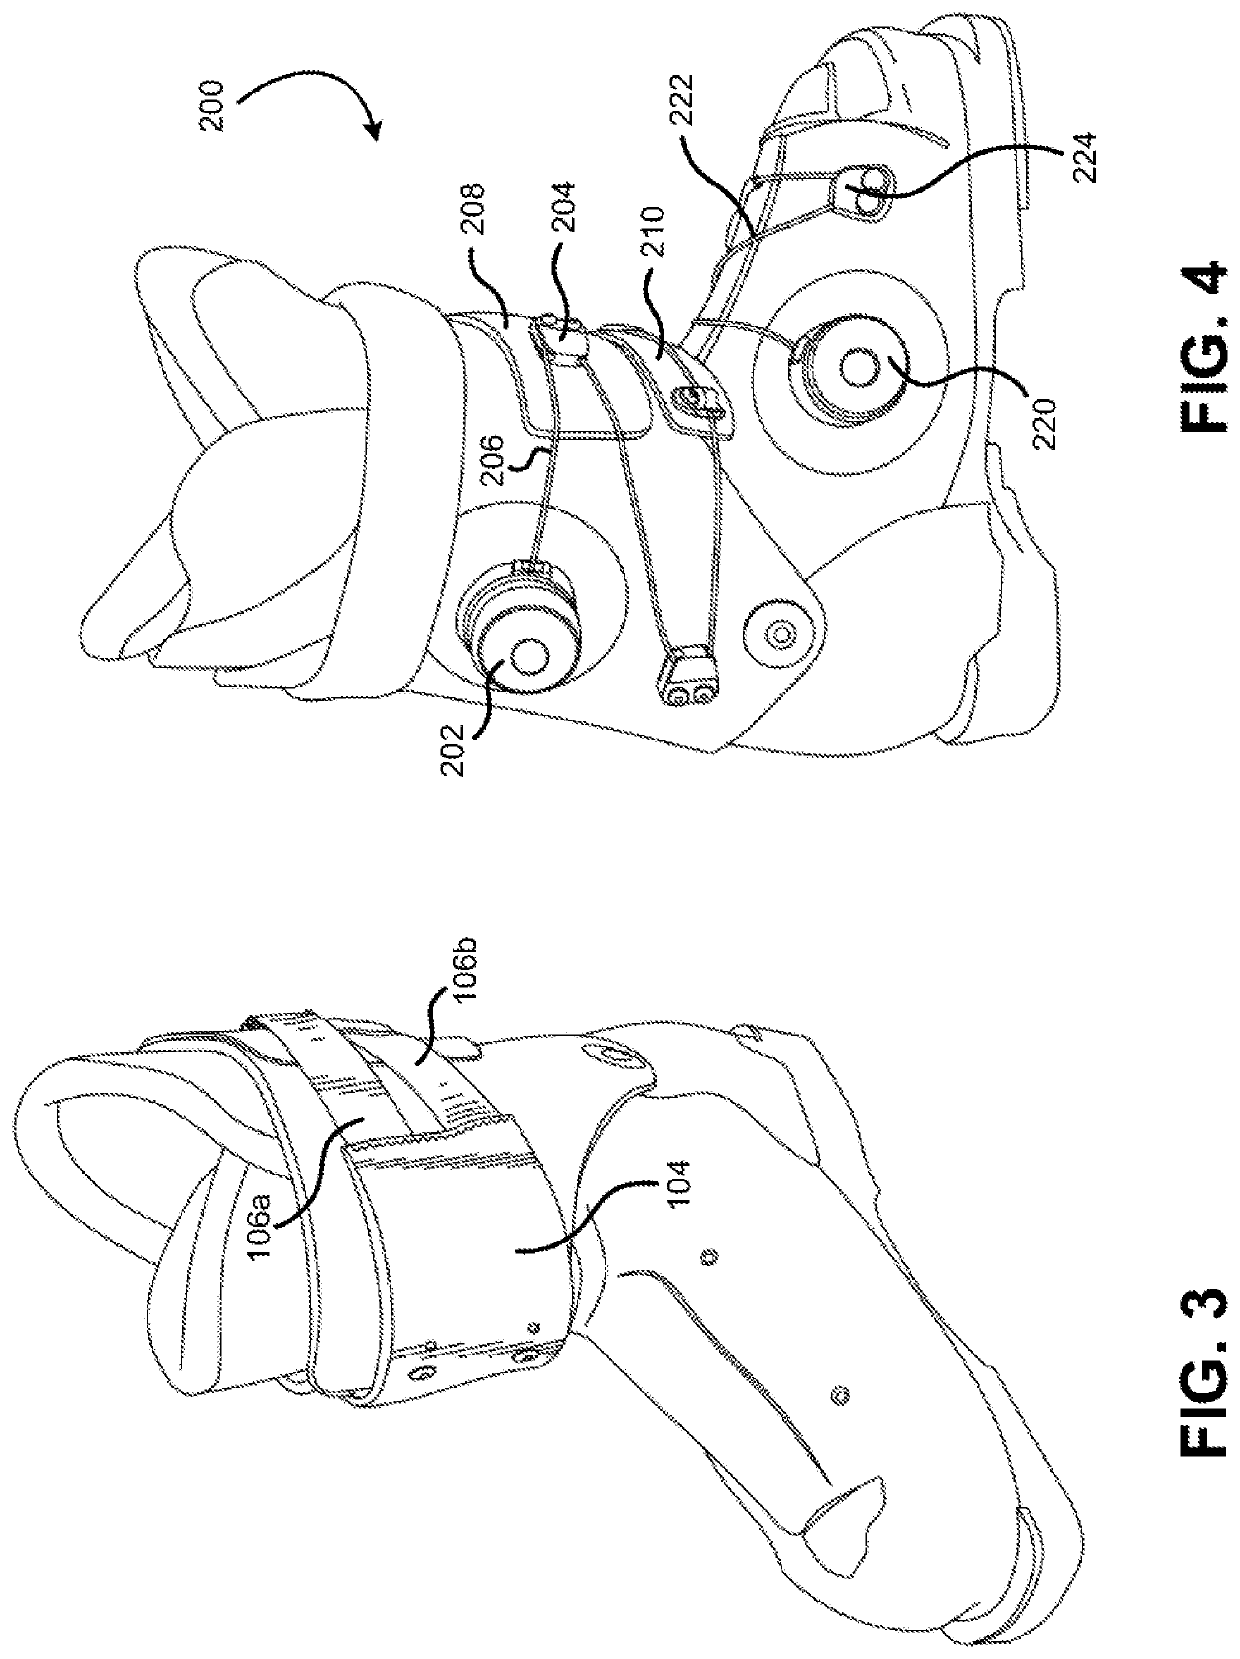 Reel based closure devices for tightening a ski boot